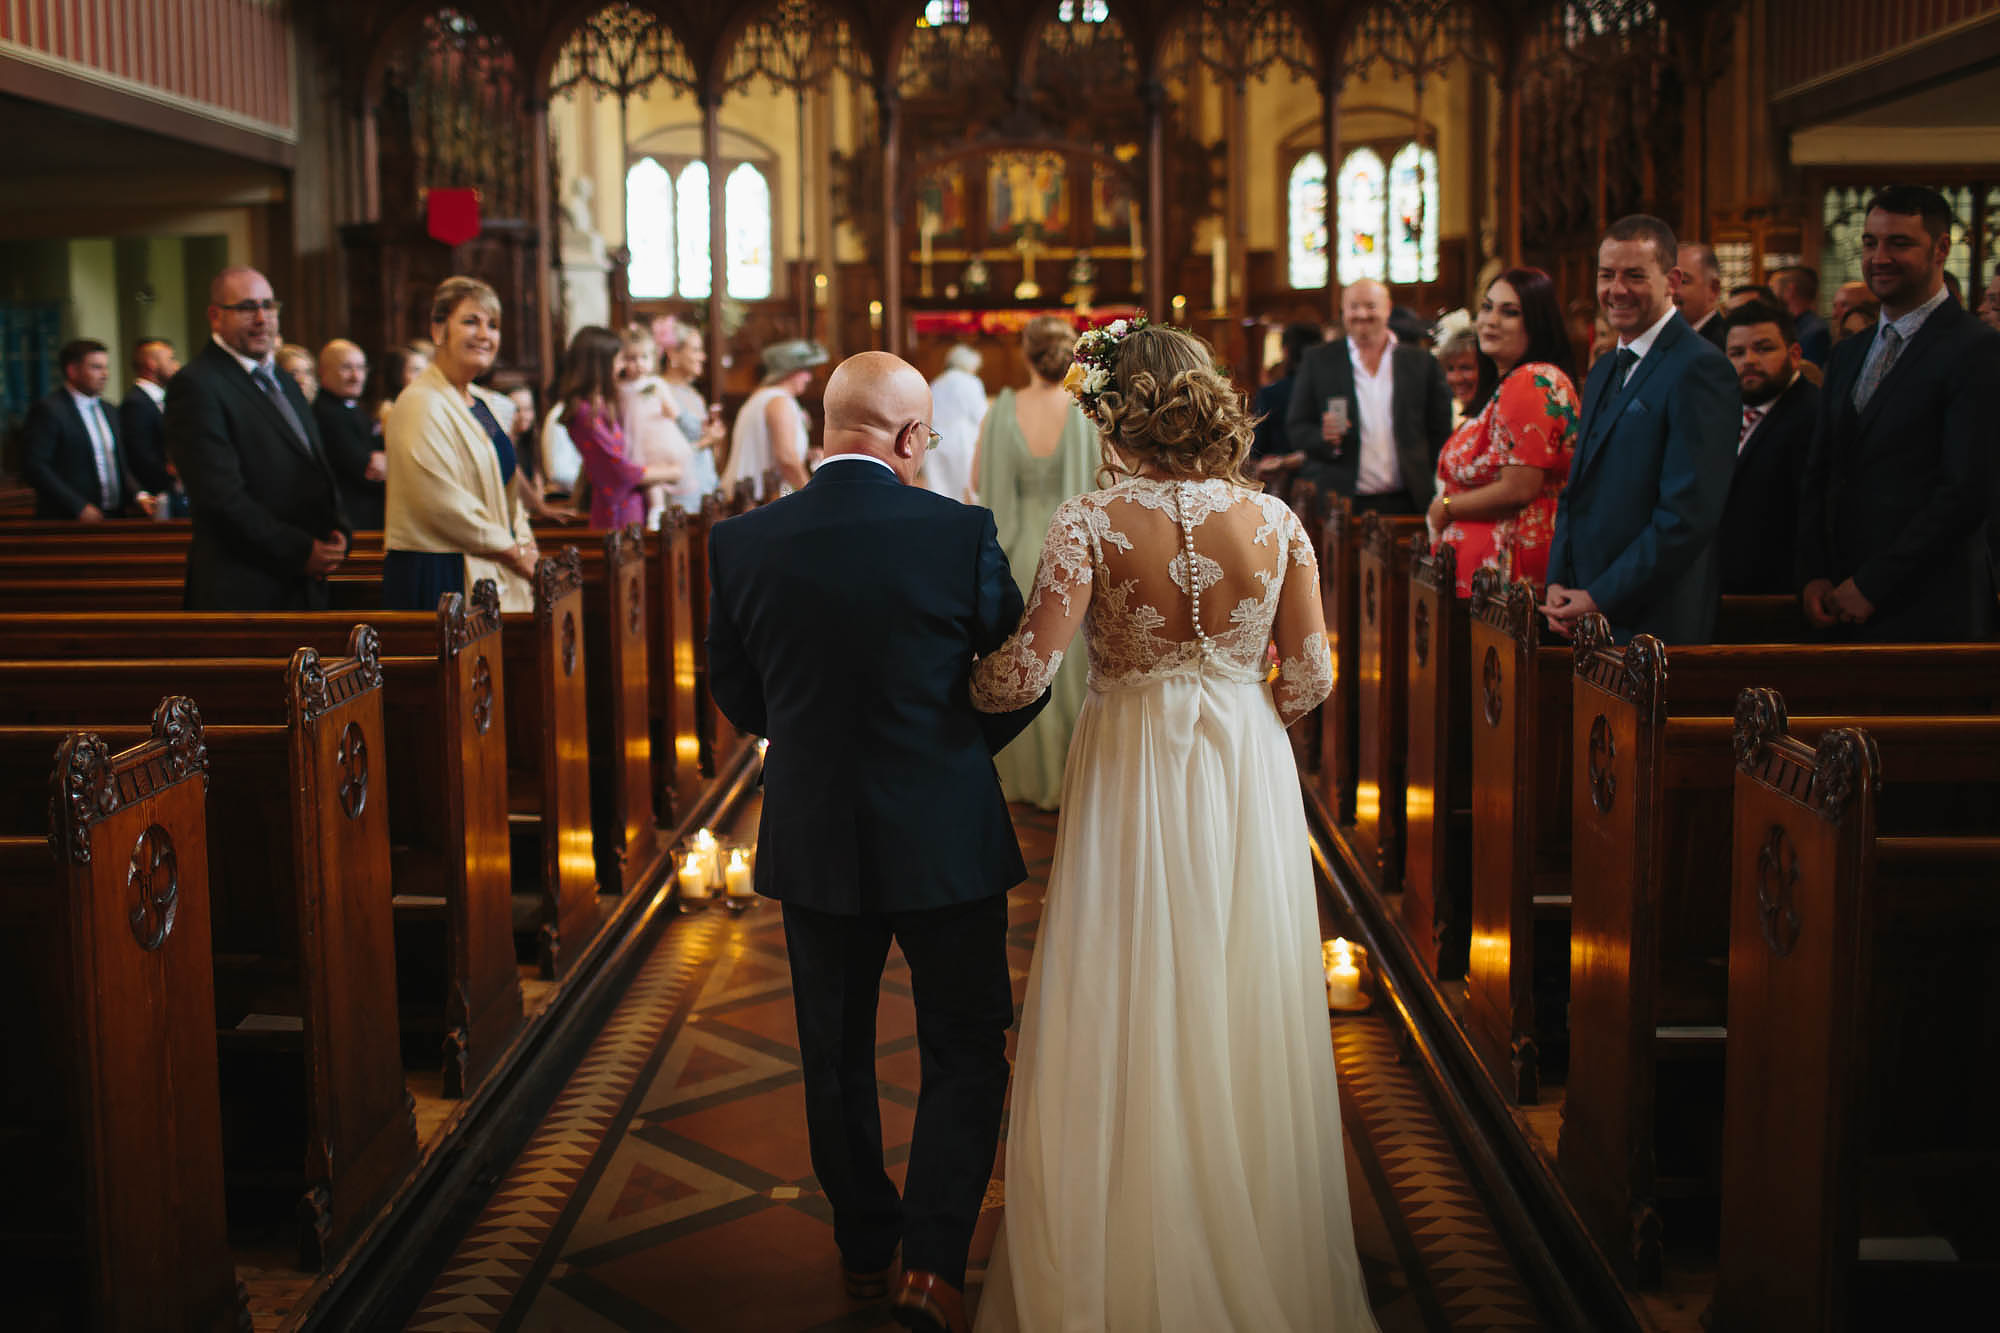 Bride and father walk down the aisle of the church on her wedding day in Manchester